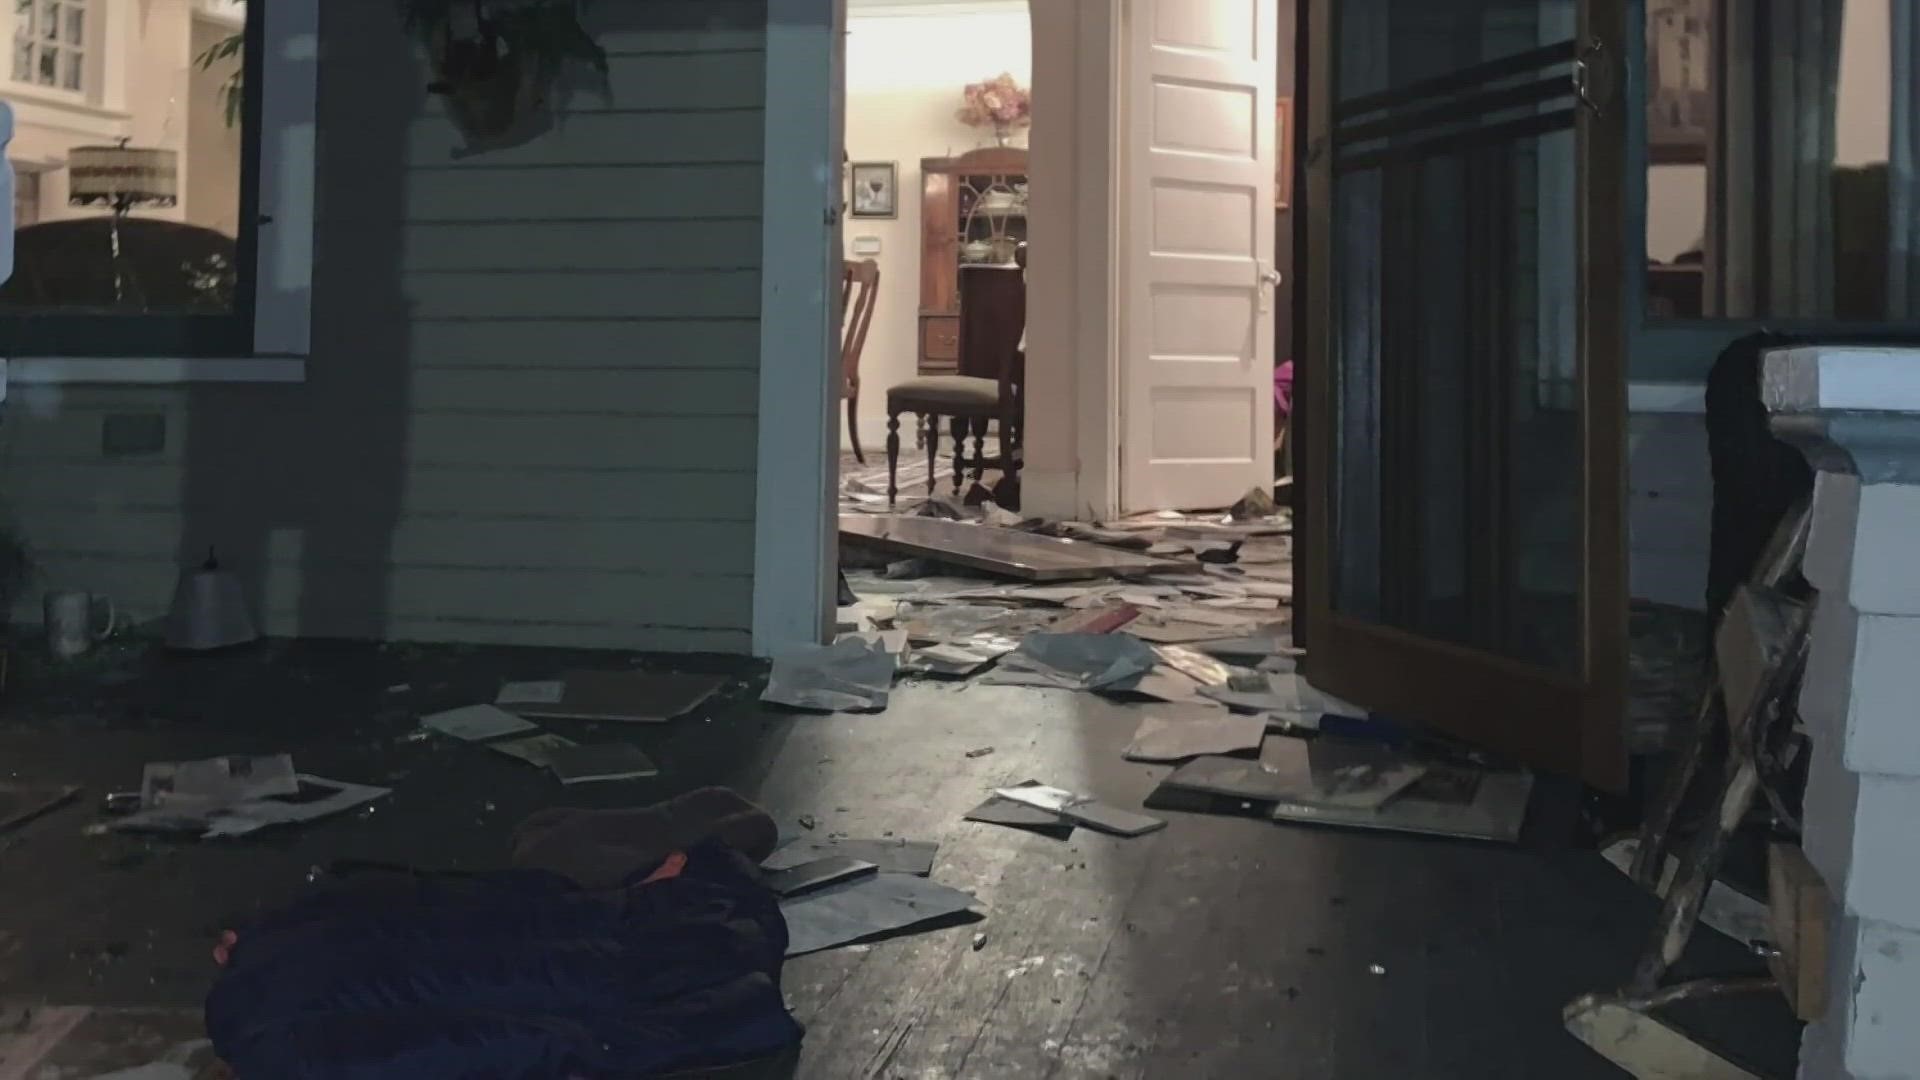 A bizarre, hours-long standoff Thursday morning in Wallingford left a mess for the homeowners after an intruder locked them out and trashed the inside of their home.